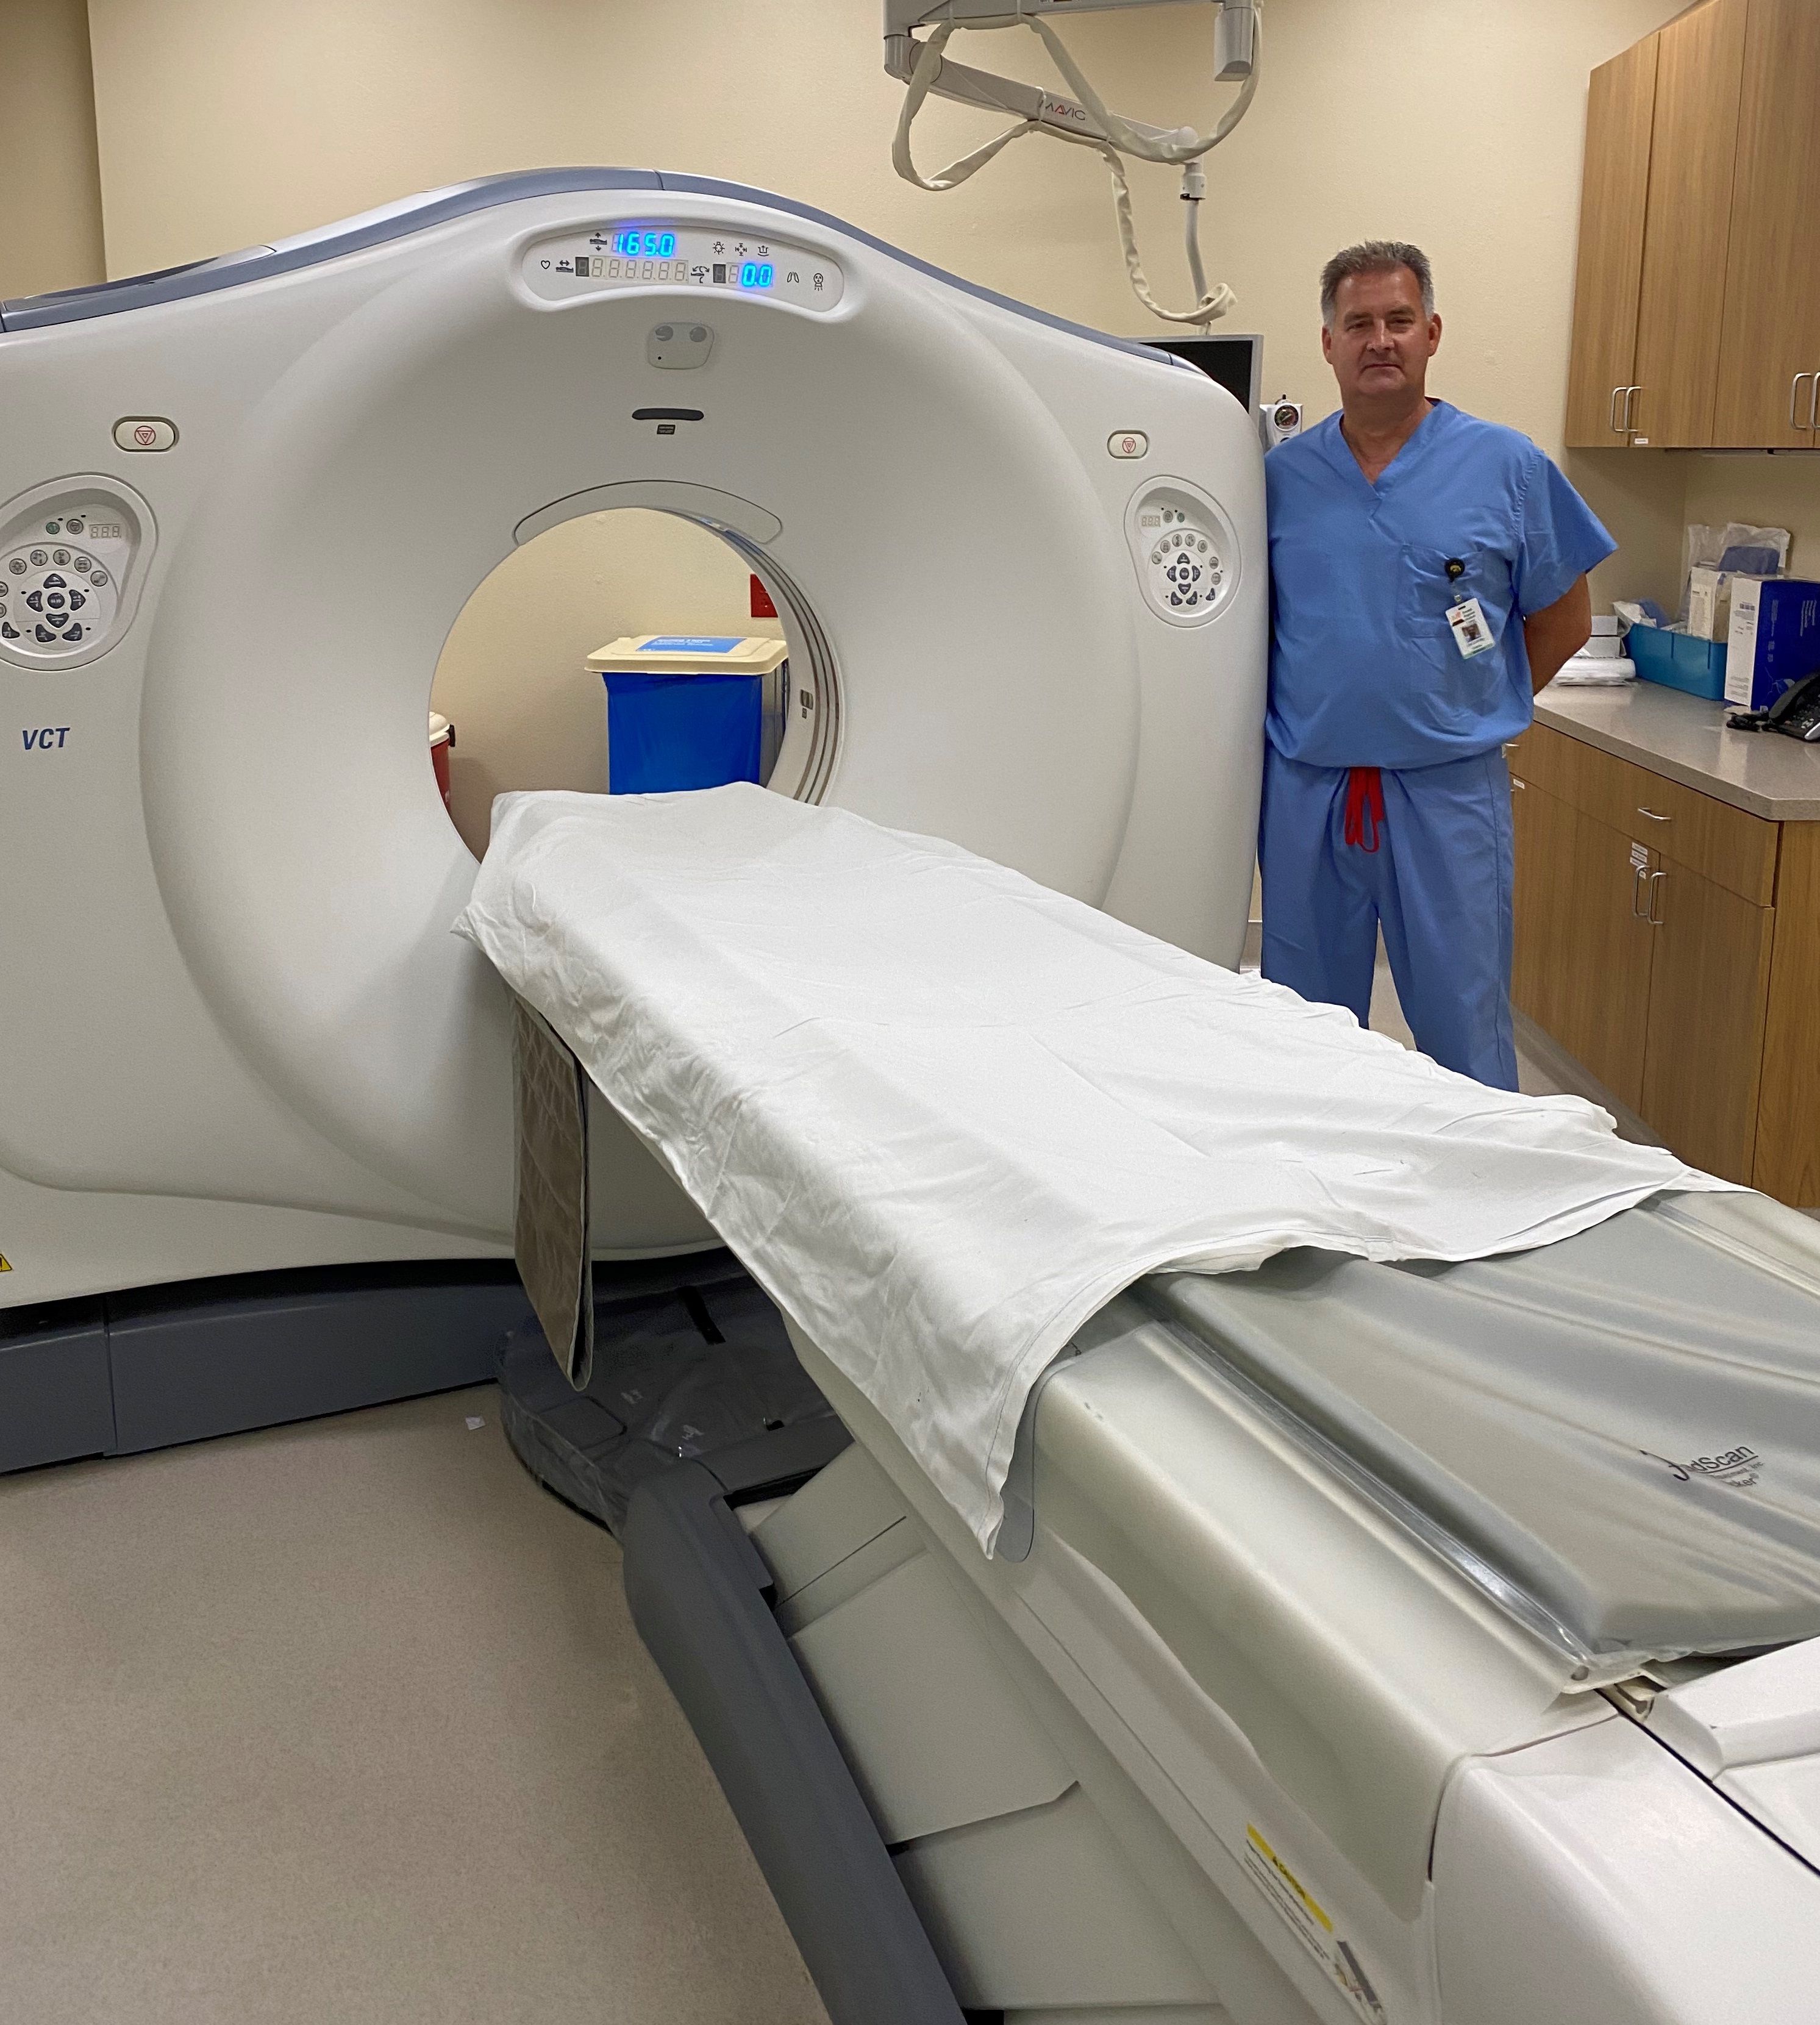 Foothill Regional Medical Center has achieved the three-year American College of Radiology (ACR) Accreditation for computed tomography (CT) this month.